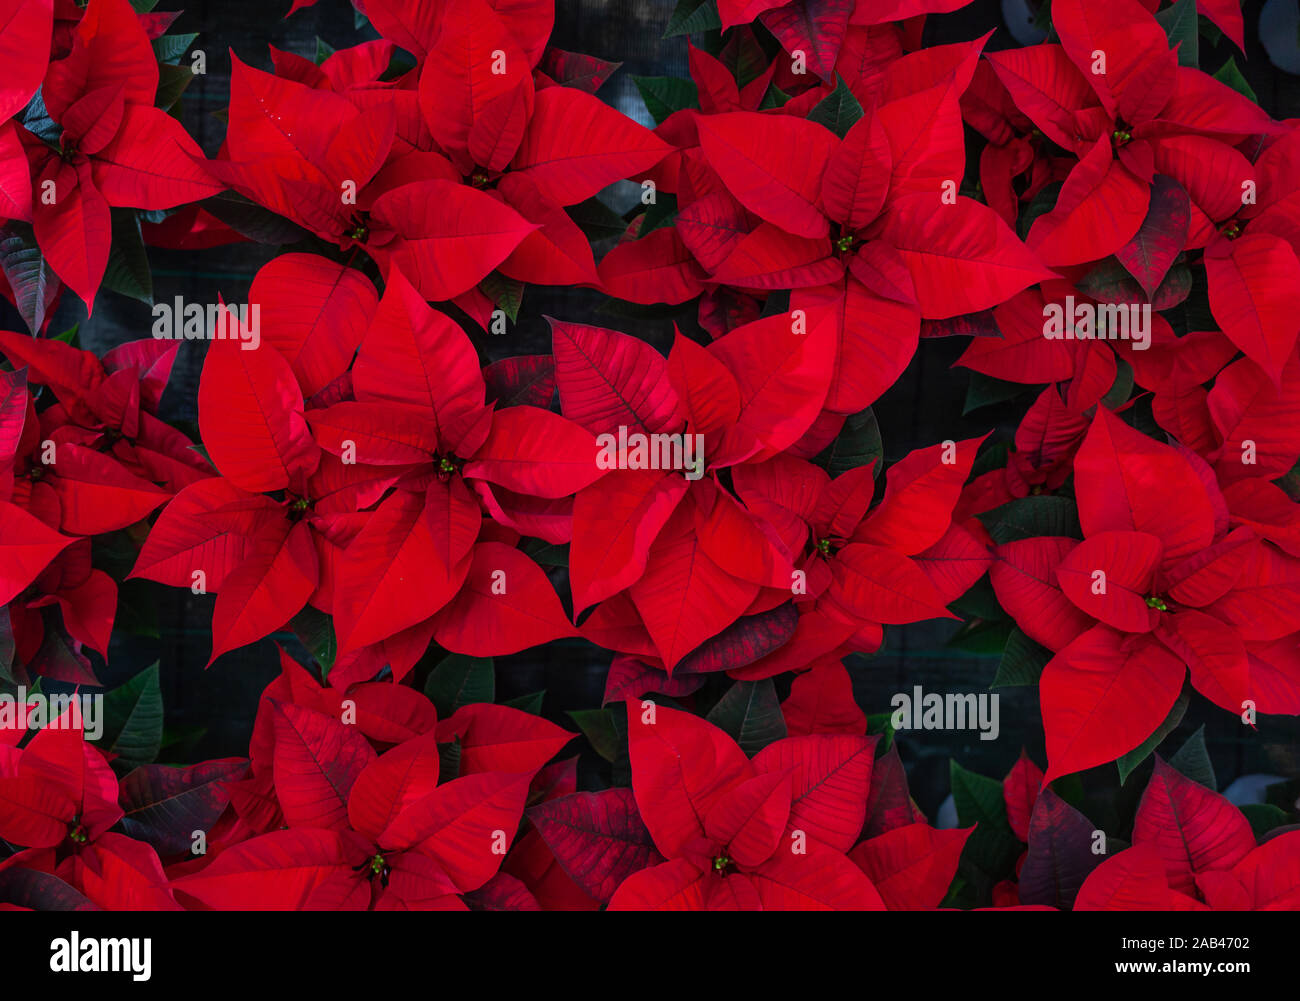 Red poinsettia flower, also known as the Christmas star or Bartholomew star. New year winter holiday xmas. Stock Photo